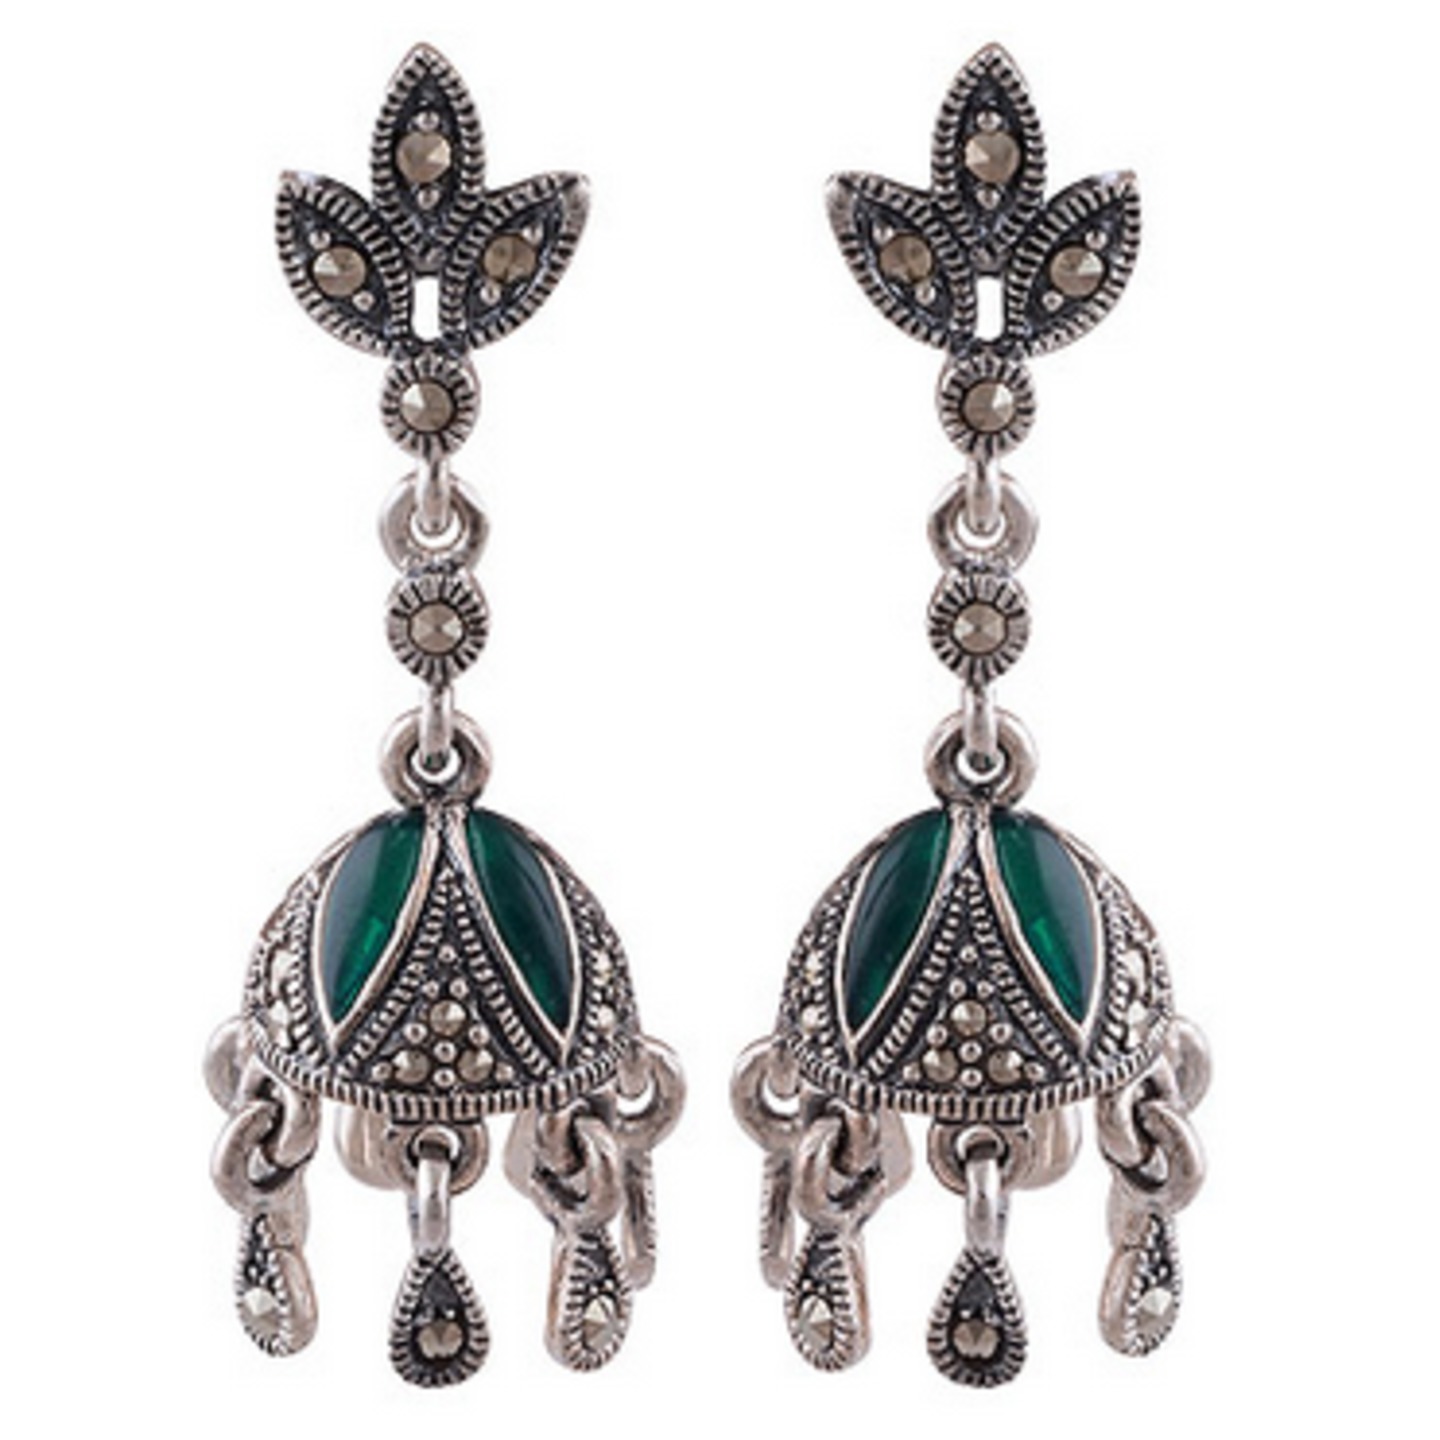 The Dome Marcasite Silver Earrings